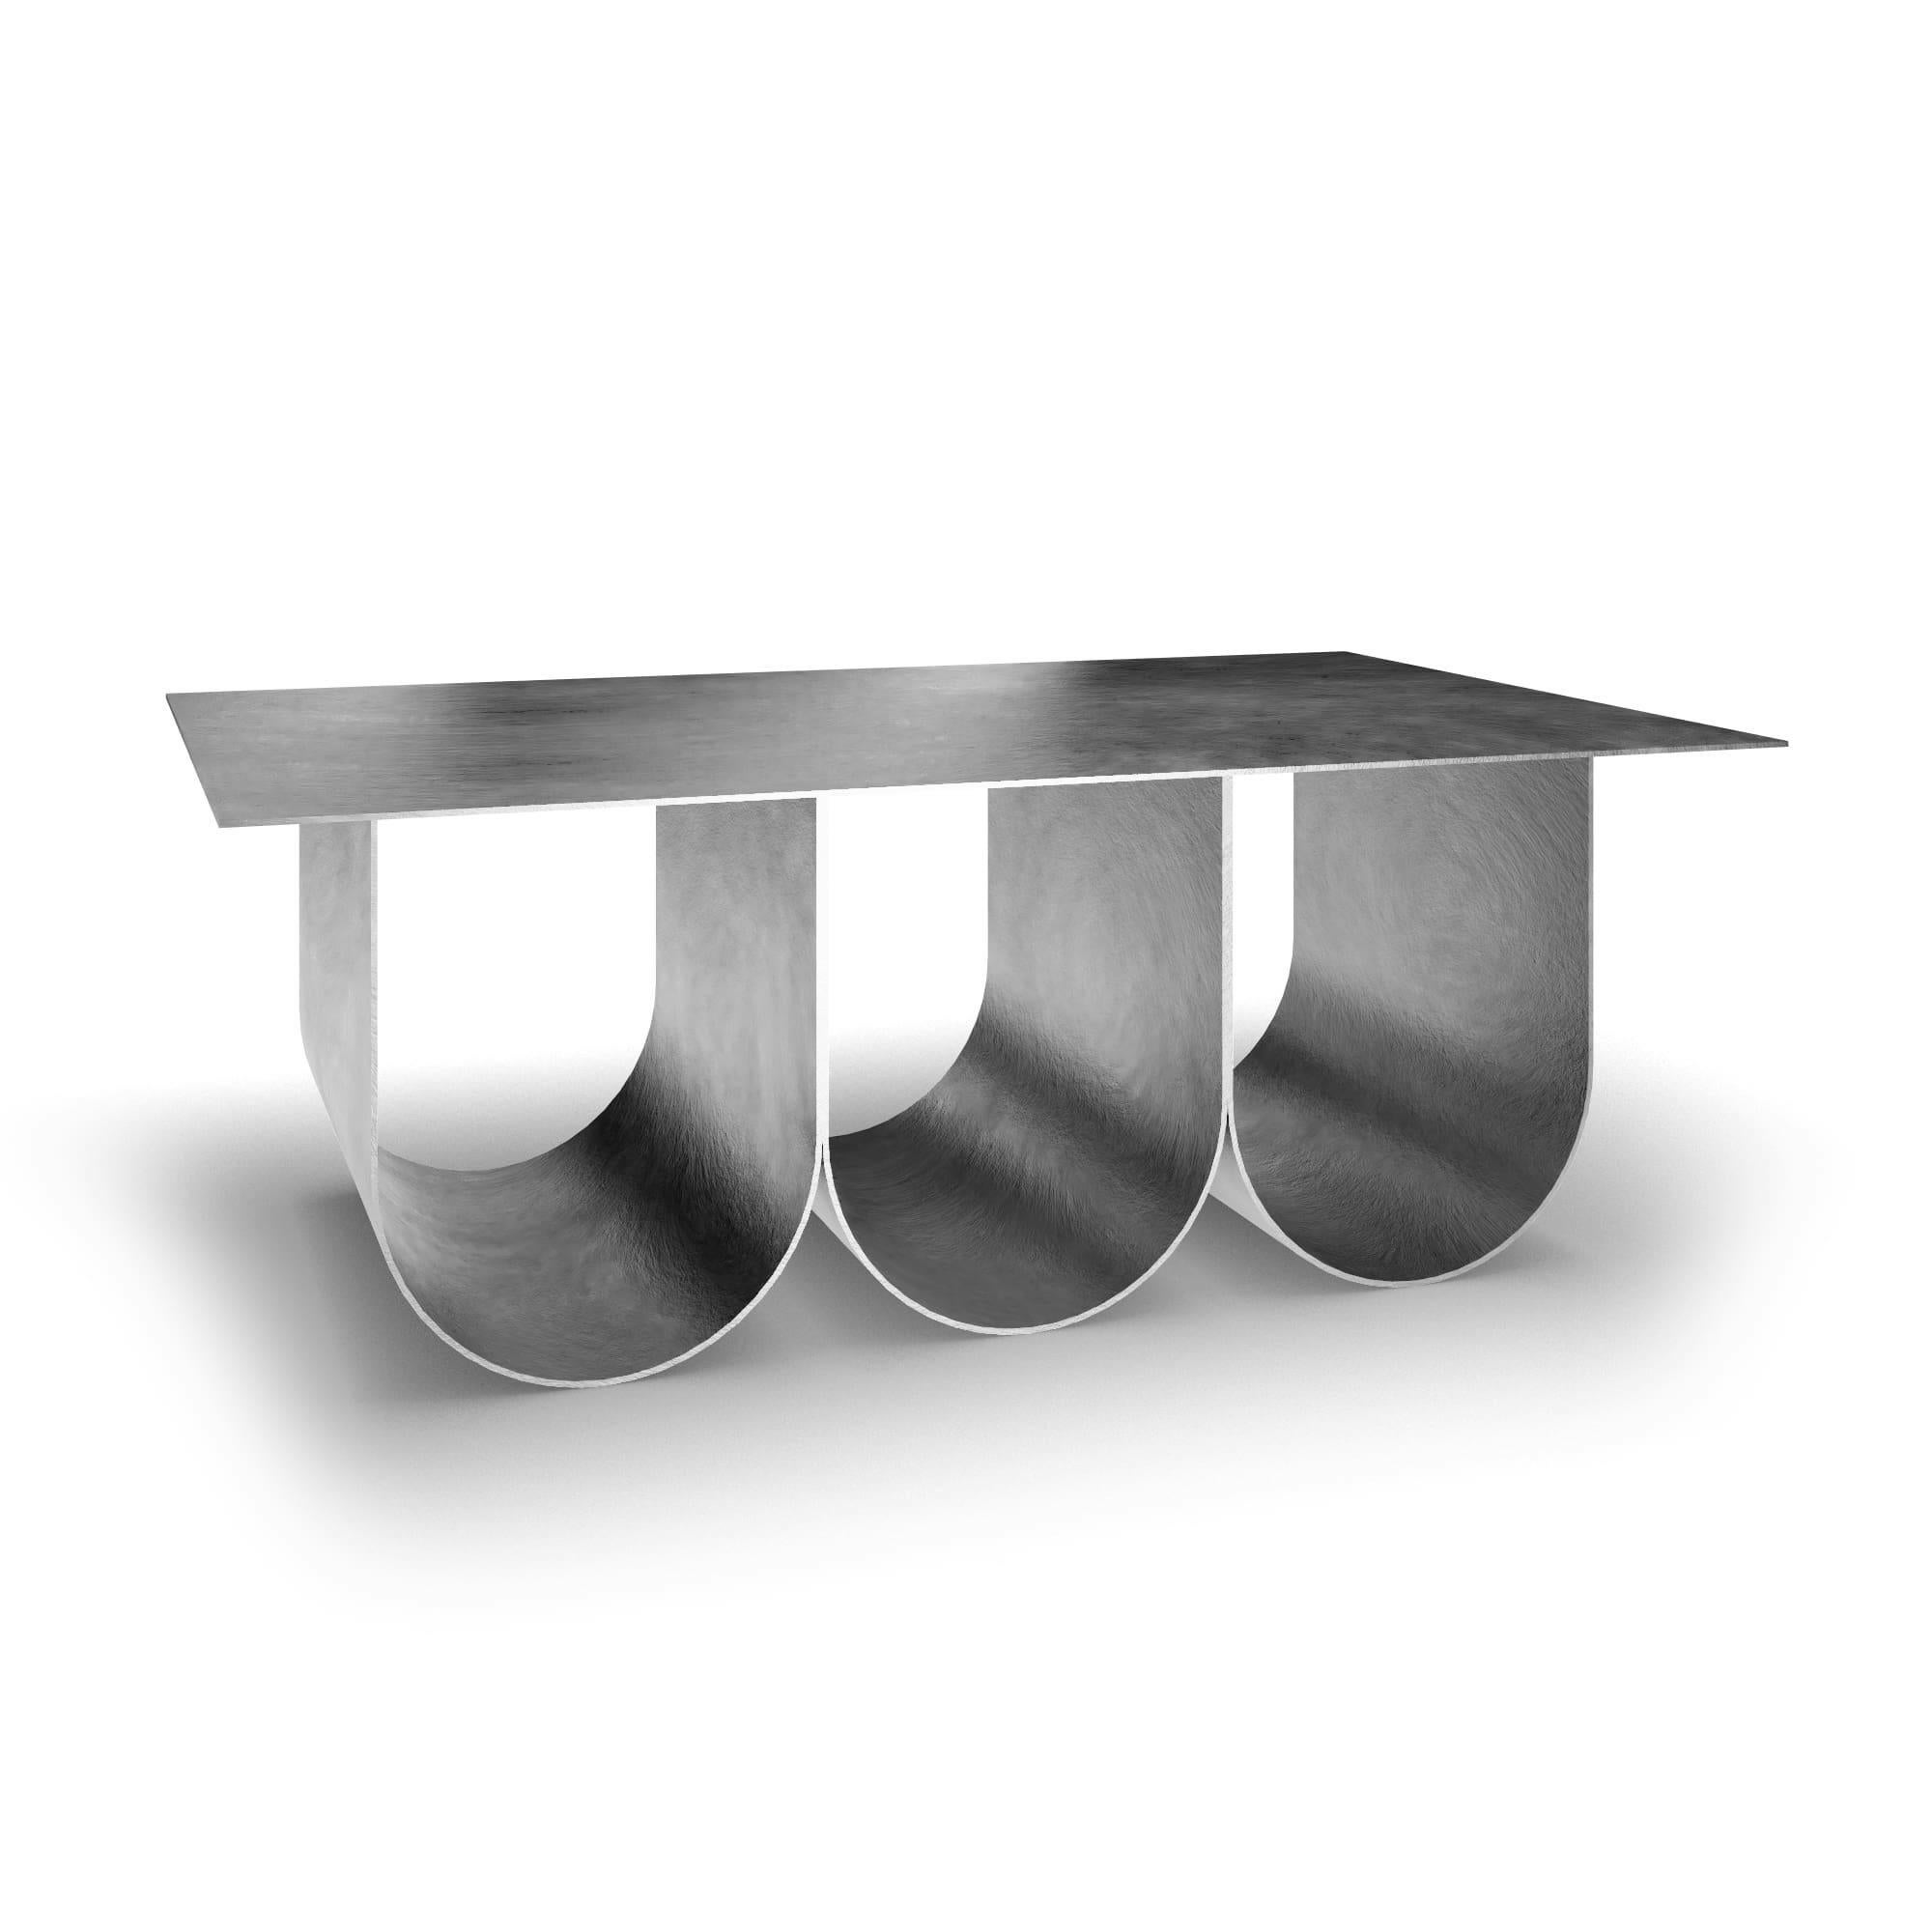 The Arcade coffee table - Square stainless steel natural color version has been created By Kasadamo in collaboration with Pierre Tassin, french designer. This table reflects a mix between old and futuristic architecture. Its identity is found in the